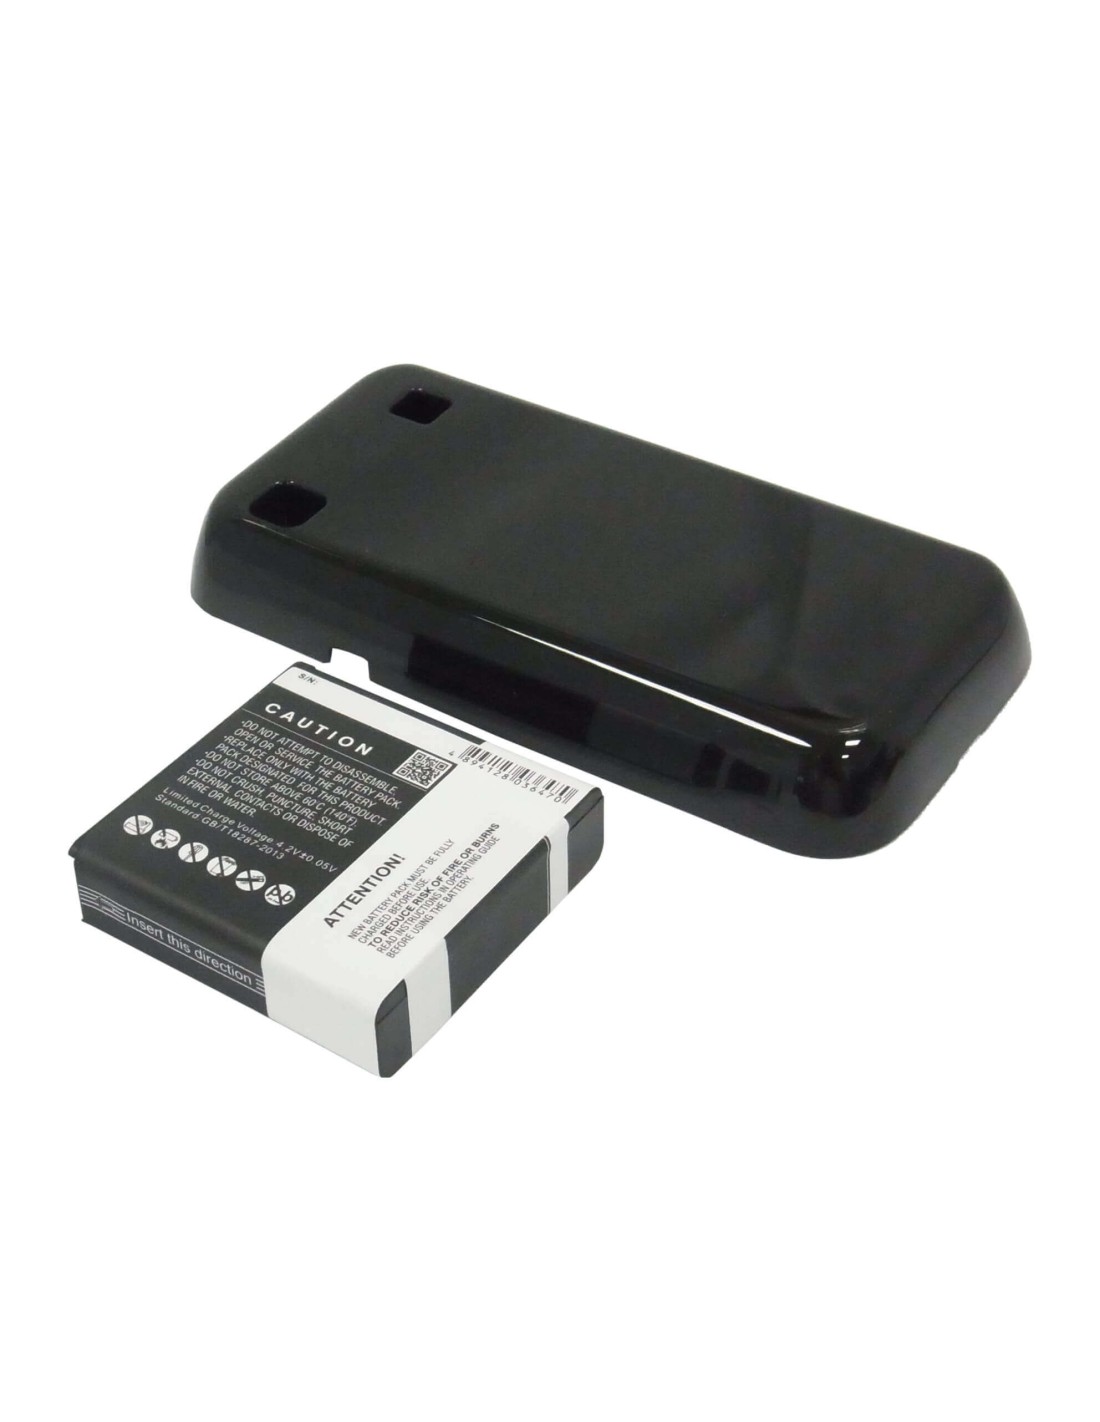 Battery for Samsung GT-i9000, Galaxy S, SGH-T959 3.7V, 3000mAh - 11.10Wh